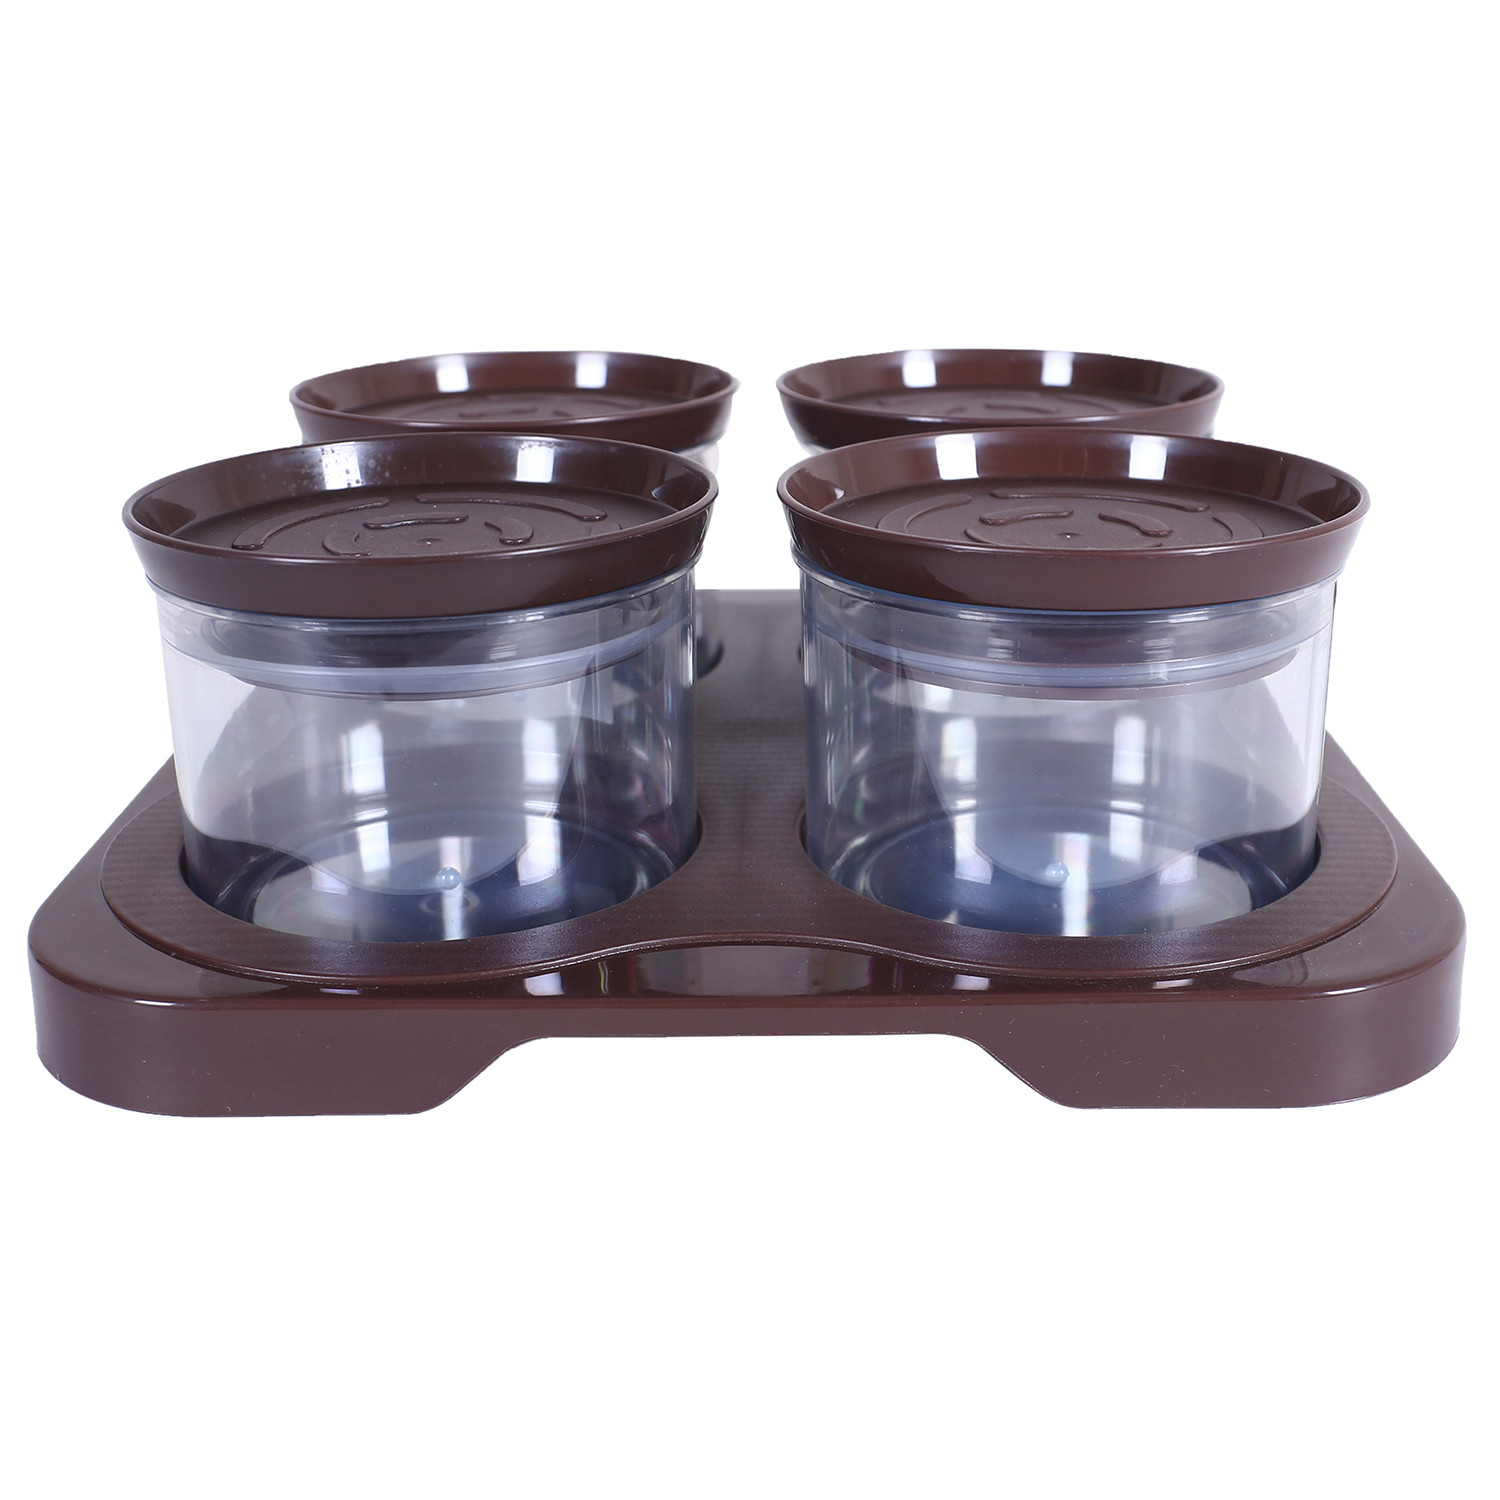 Kuber Industries 4 Containers & Tray Set|Unbreakable Plastic Snackers,Cookies,Nuts Serving Tray|Airtight Containers with Lid,350 ml (Brown)